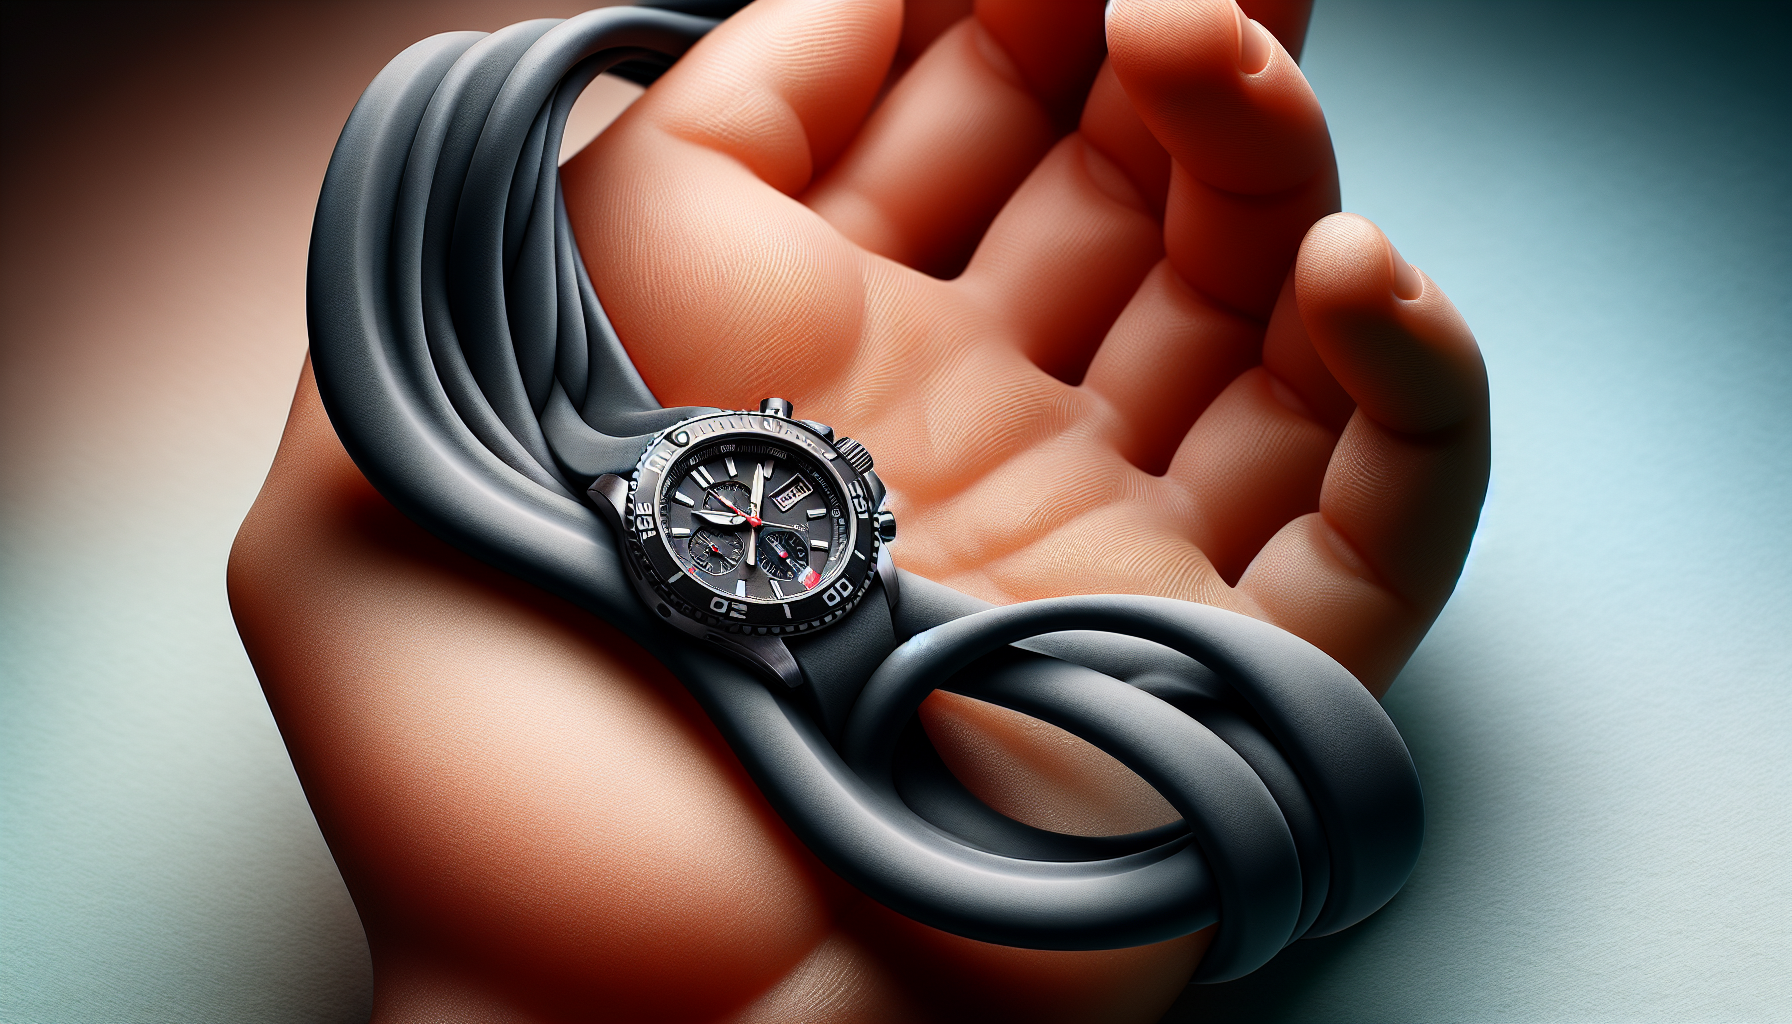 Artistic representation of a durable and comfortable rubber material used in Tropic watch straps